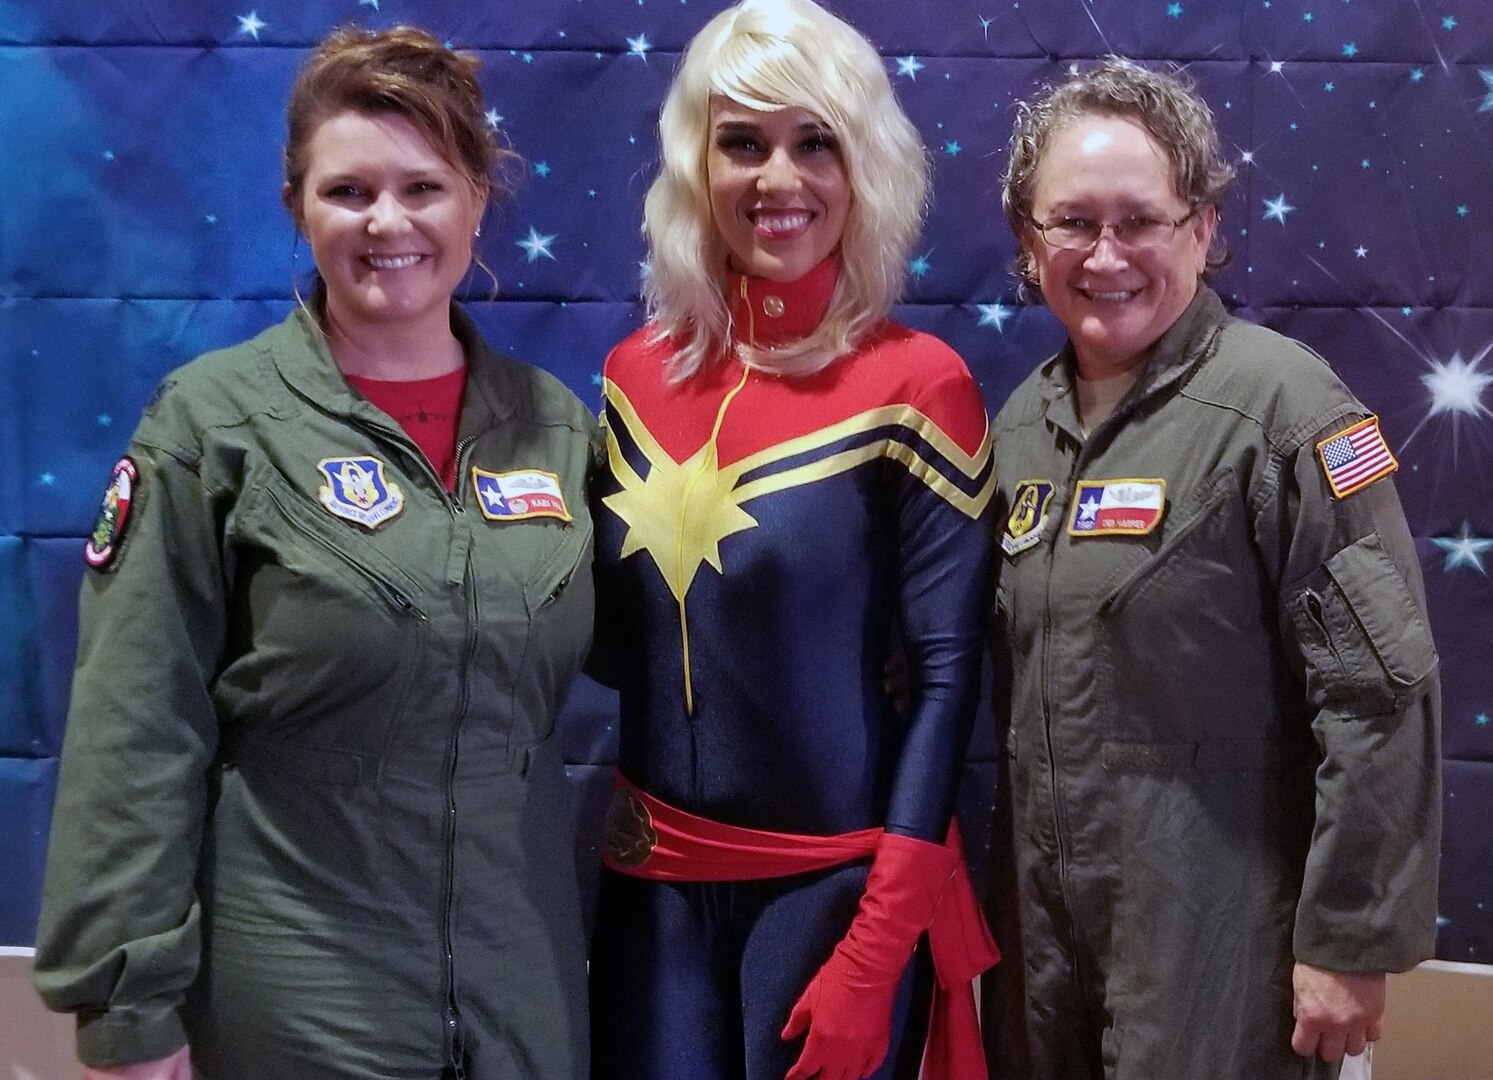 Lt. Col. Kari Hill (left), 433rd Operations Support Squadron commander/pilot, and Tech. Sgt. Debra Hill (right), 68th Airlift Squadron loadmaster, both with Joint Base San Antonio-Lackland, pose with Rebecca Sorenson, owner of Chic Basics, and a domestic engineer March 23 during the “Marvelous Women Don’t Need Capes” event at the Alamo Drafthouse movie cinema in San Antonio. The “Show them Everything Possible” Organization of San Antonio hosted the event.